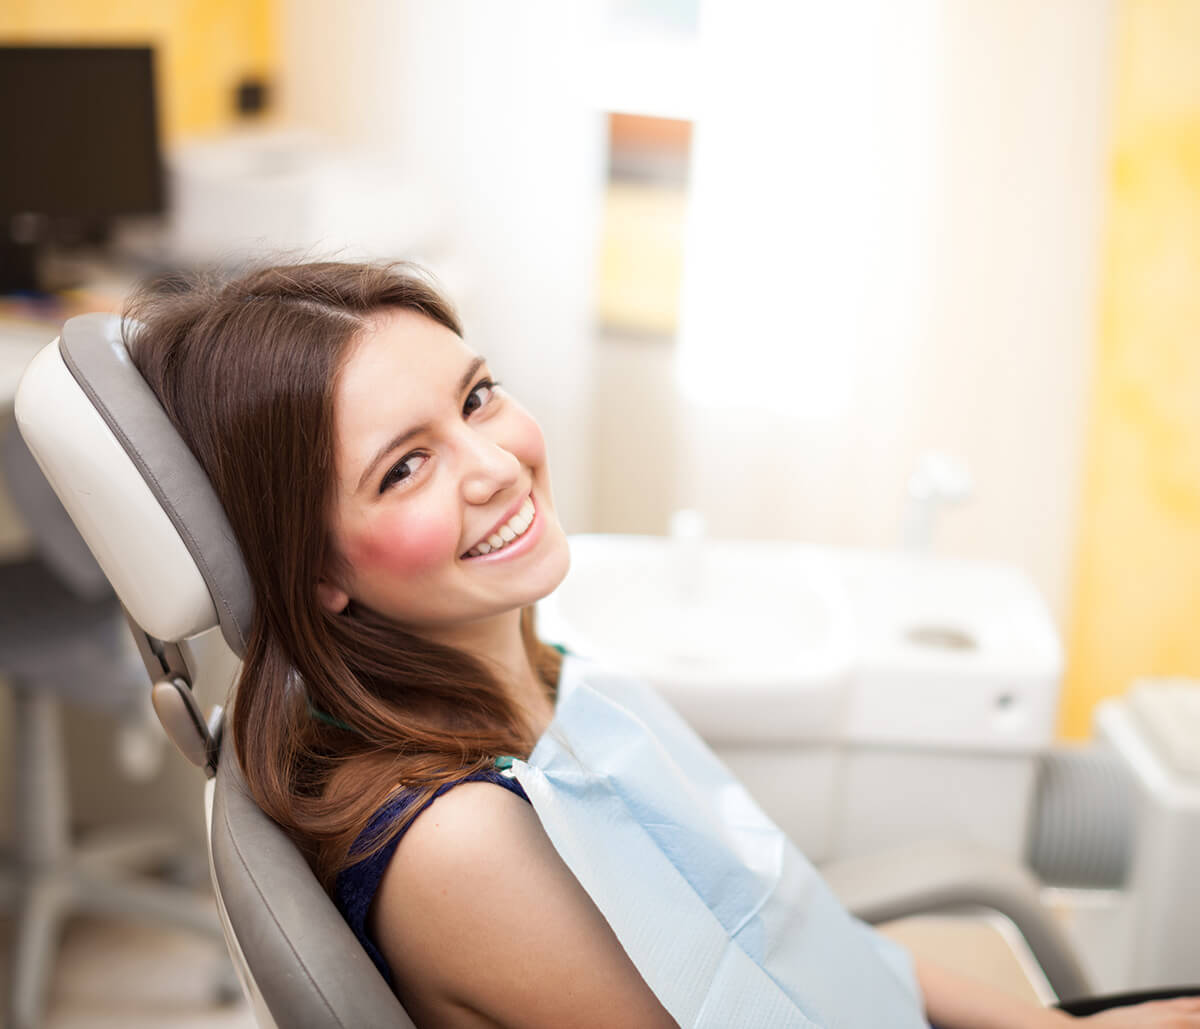 From the Emergency Dentist, Get the Urgent Dental Services You Need from Burlington Area